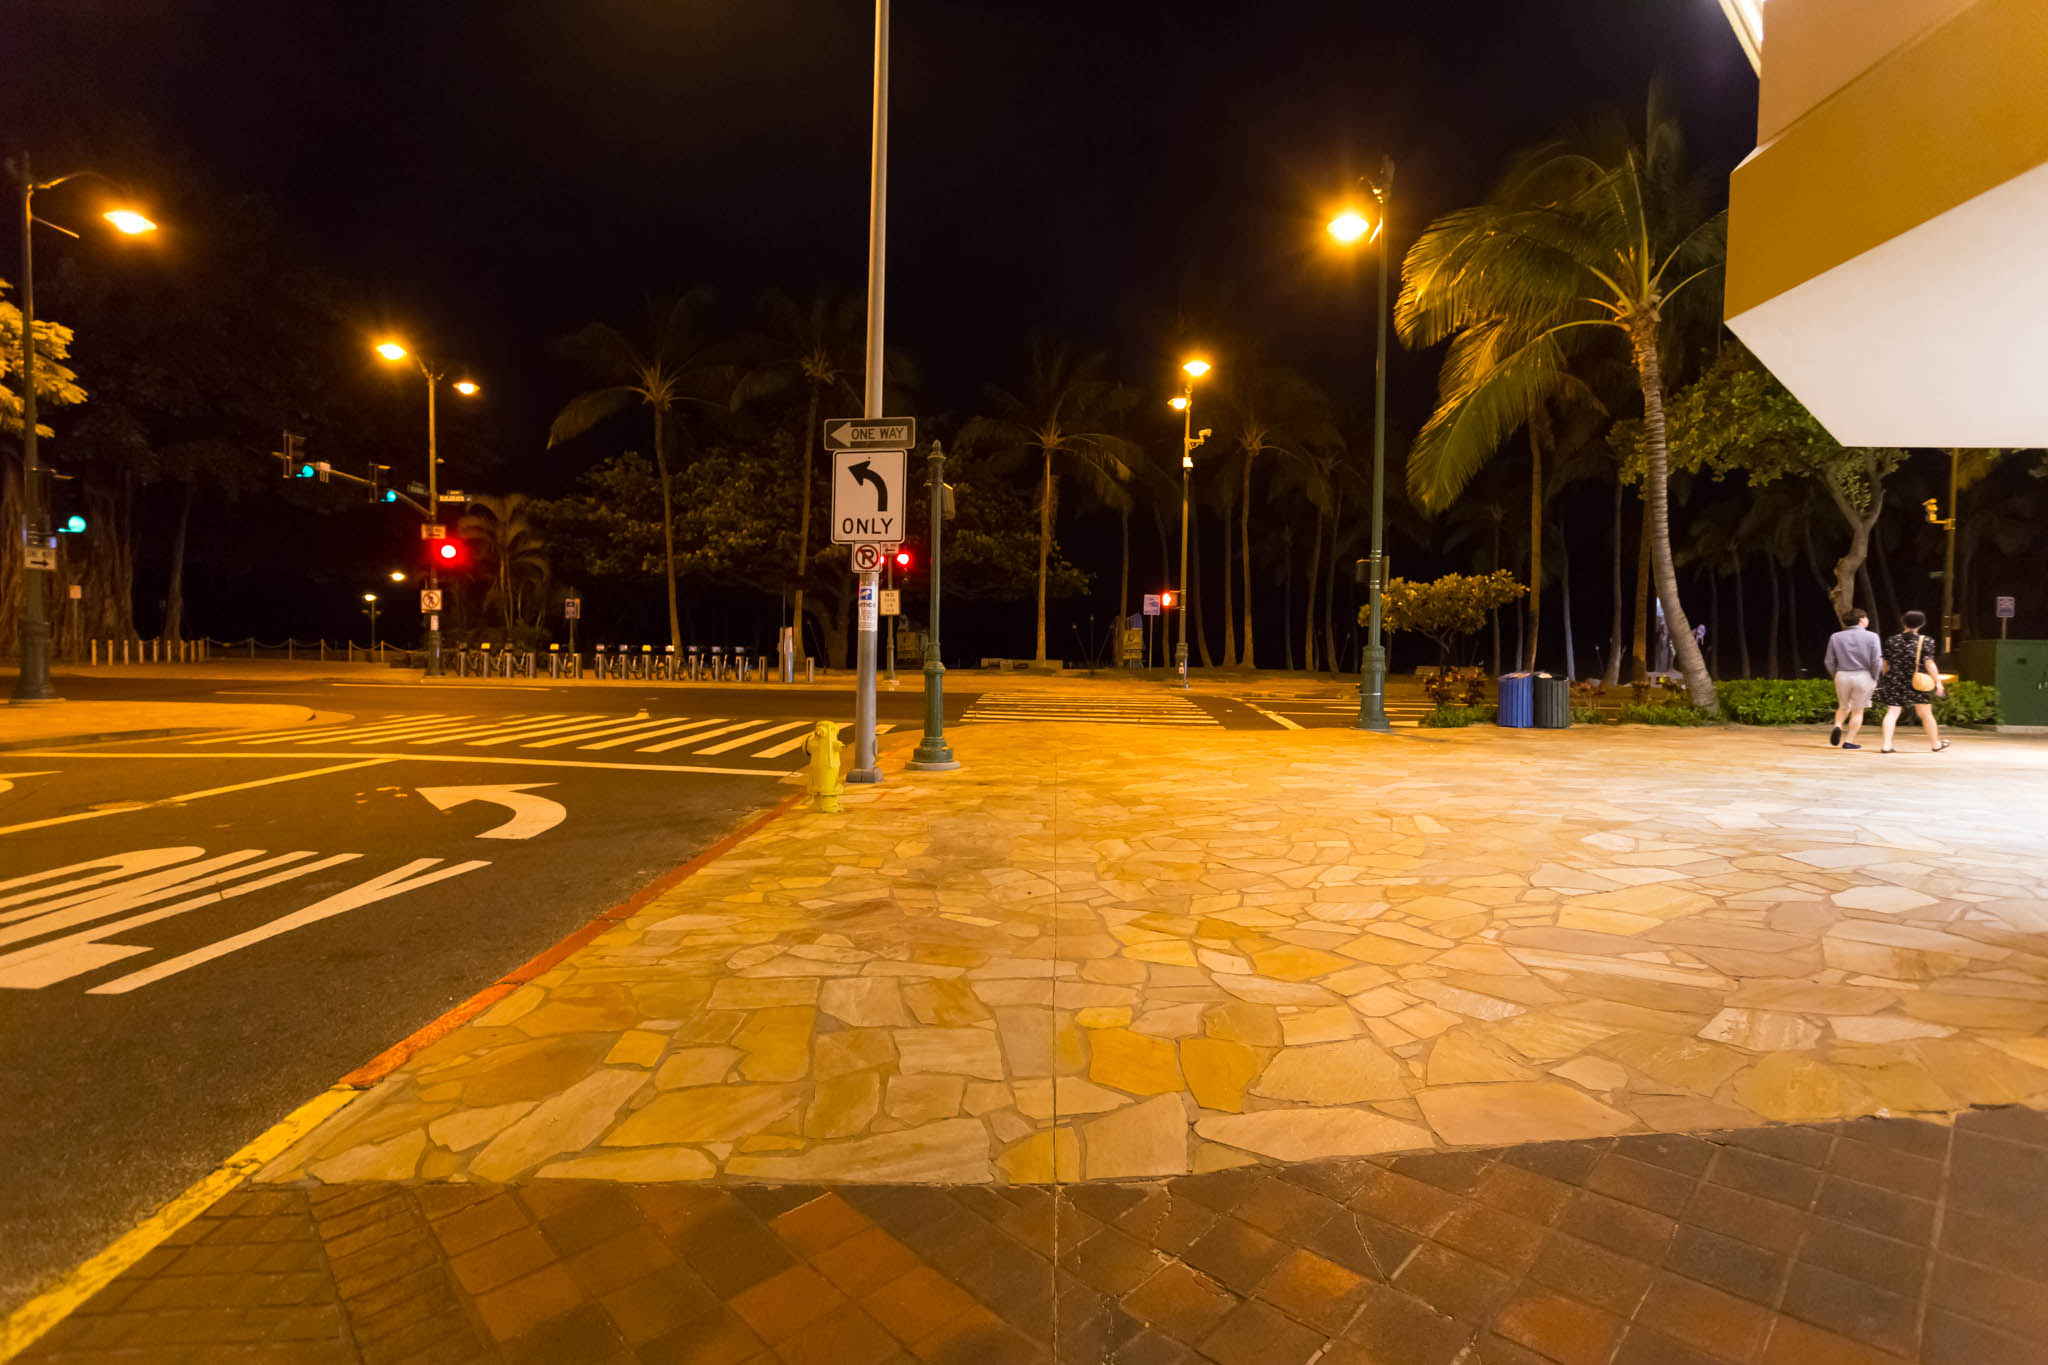 a street lights and palm trees at night